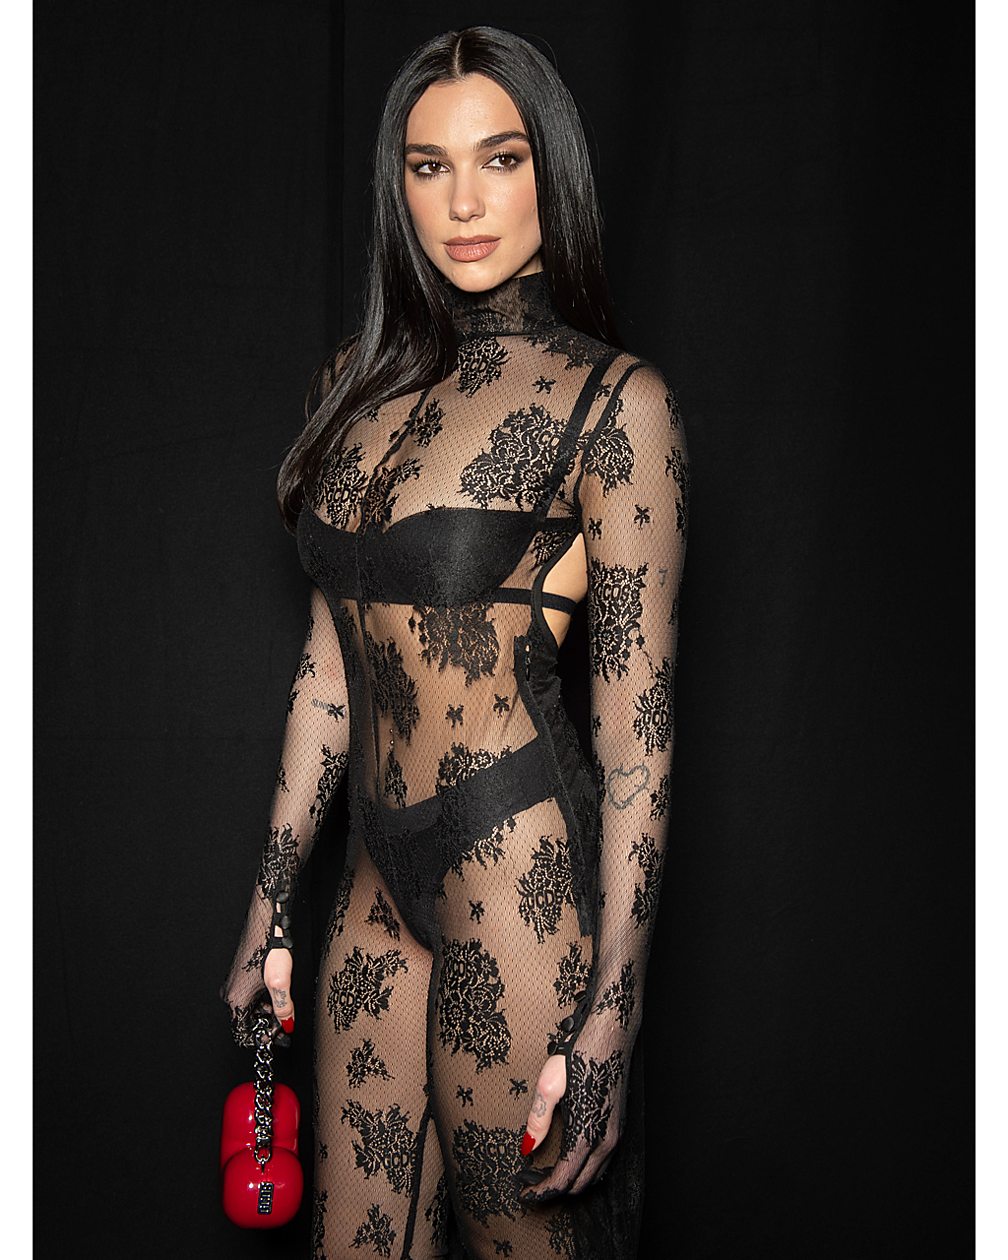 Getty Images Dua Lipa was among the  glamorous celebrities who favoured a daring, ultra-sheer look this year (Credit: Getty Images)